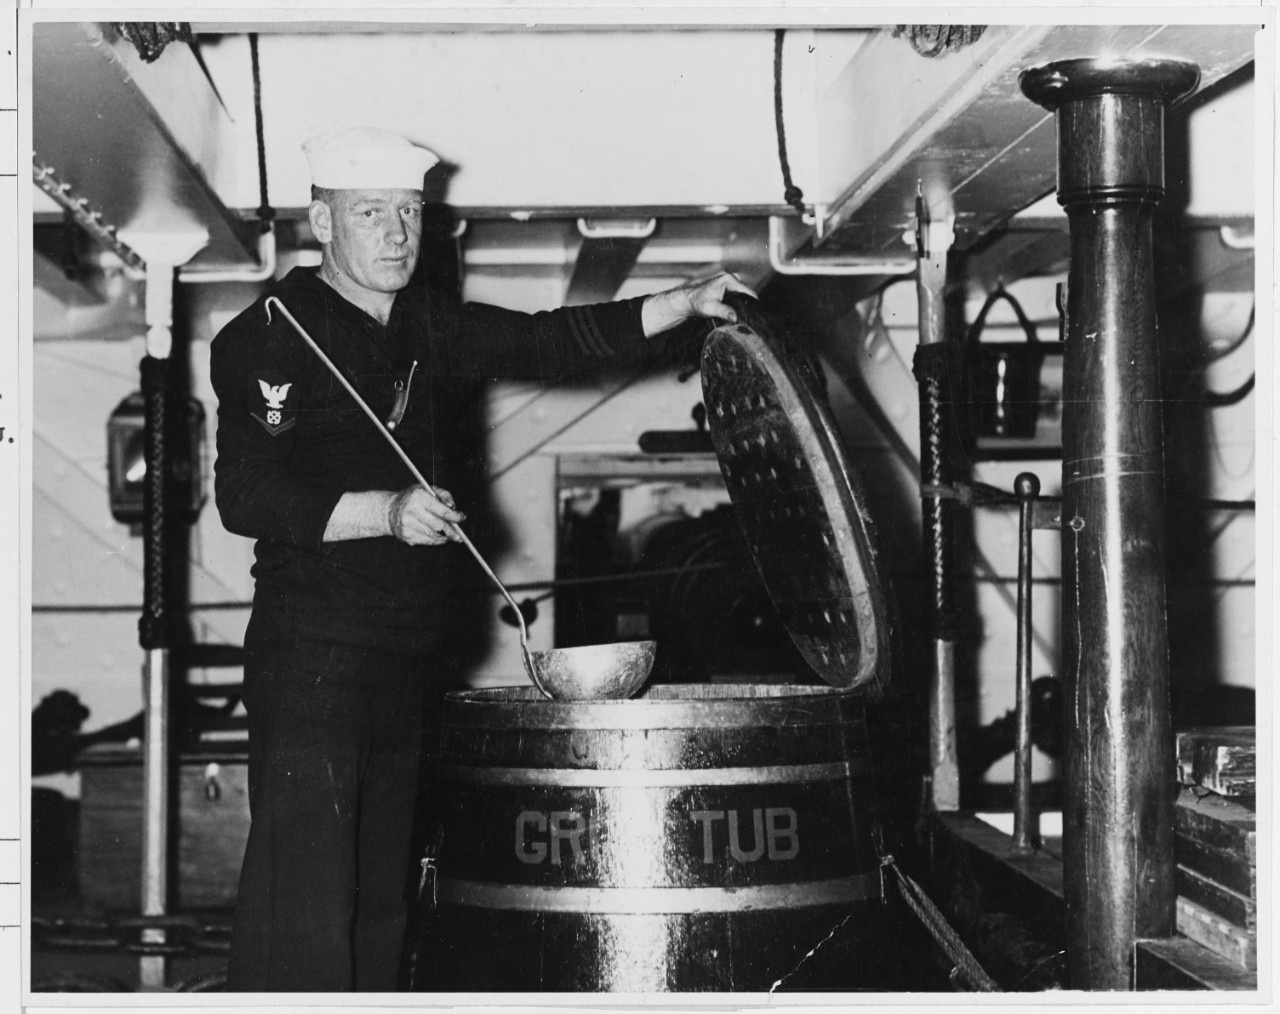 The Grog Tub on USS CONSTITUTION